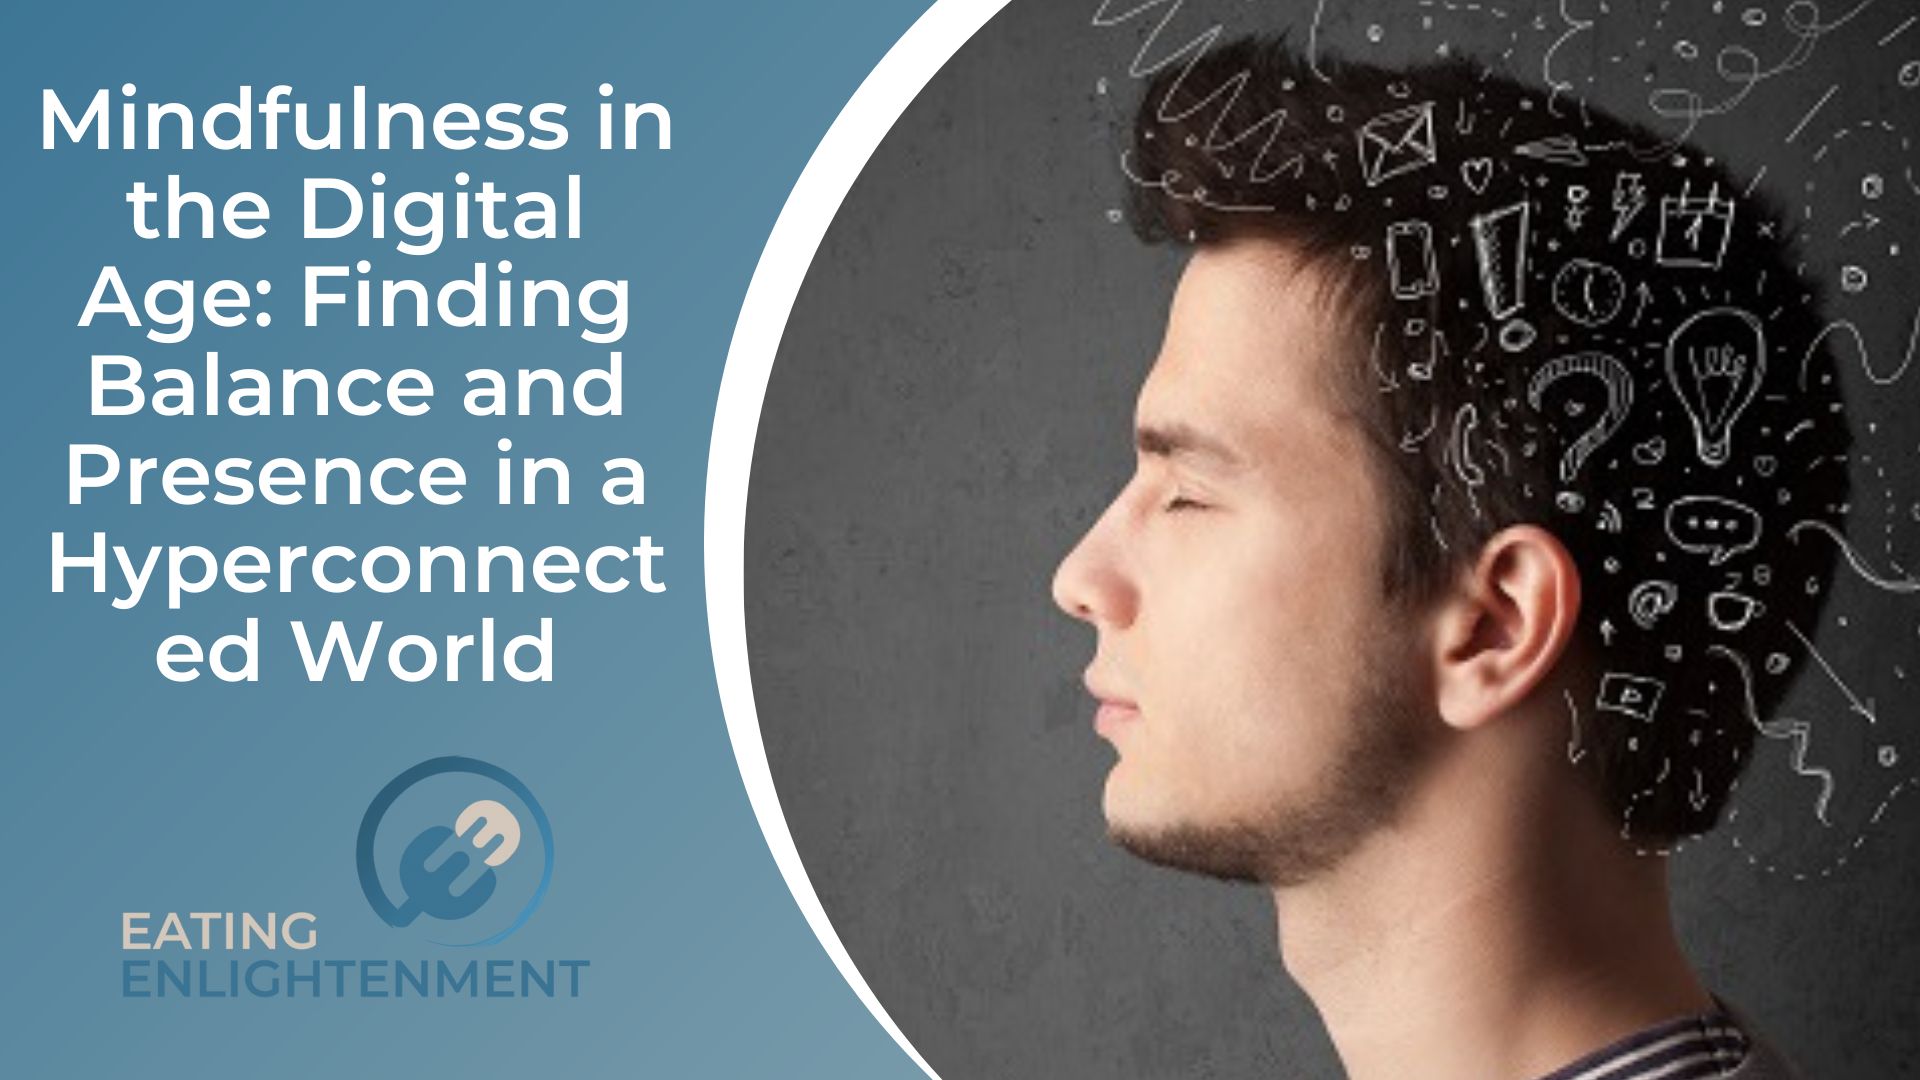 Mindfulness in the Digital Age Finding Balance and Presence in a Hyperconnected World